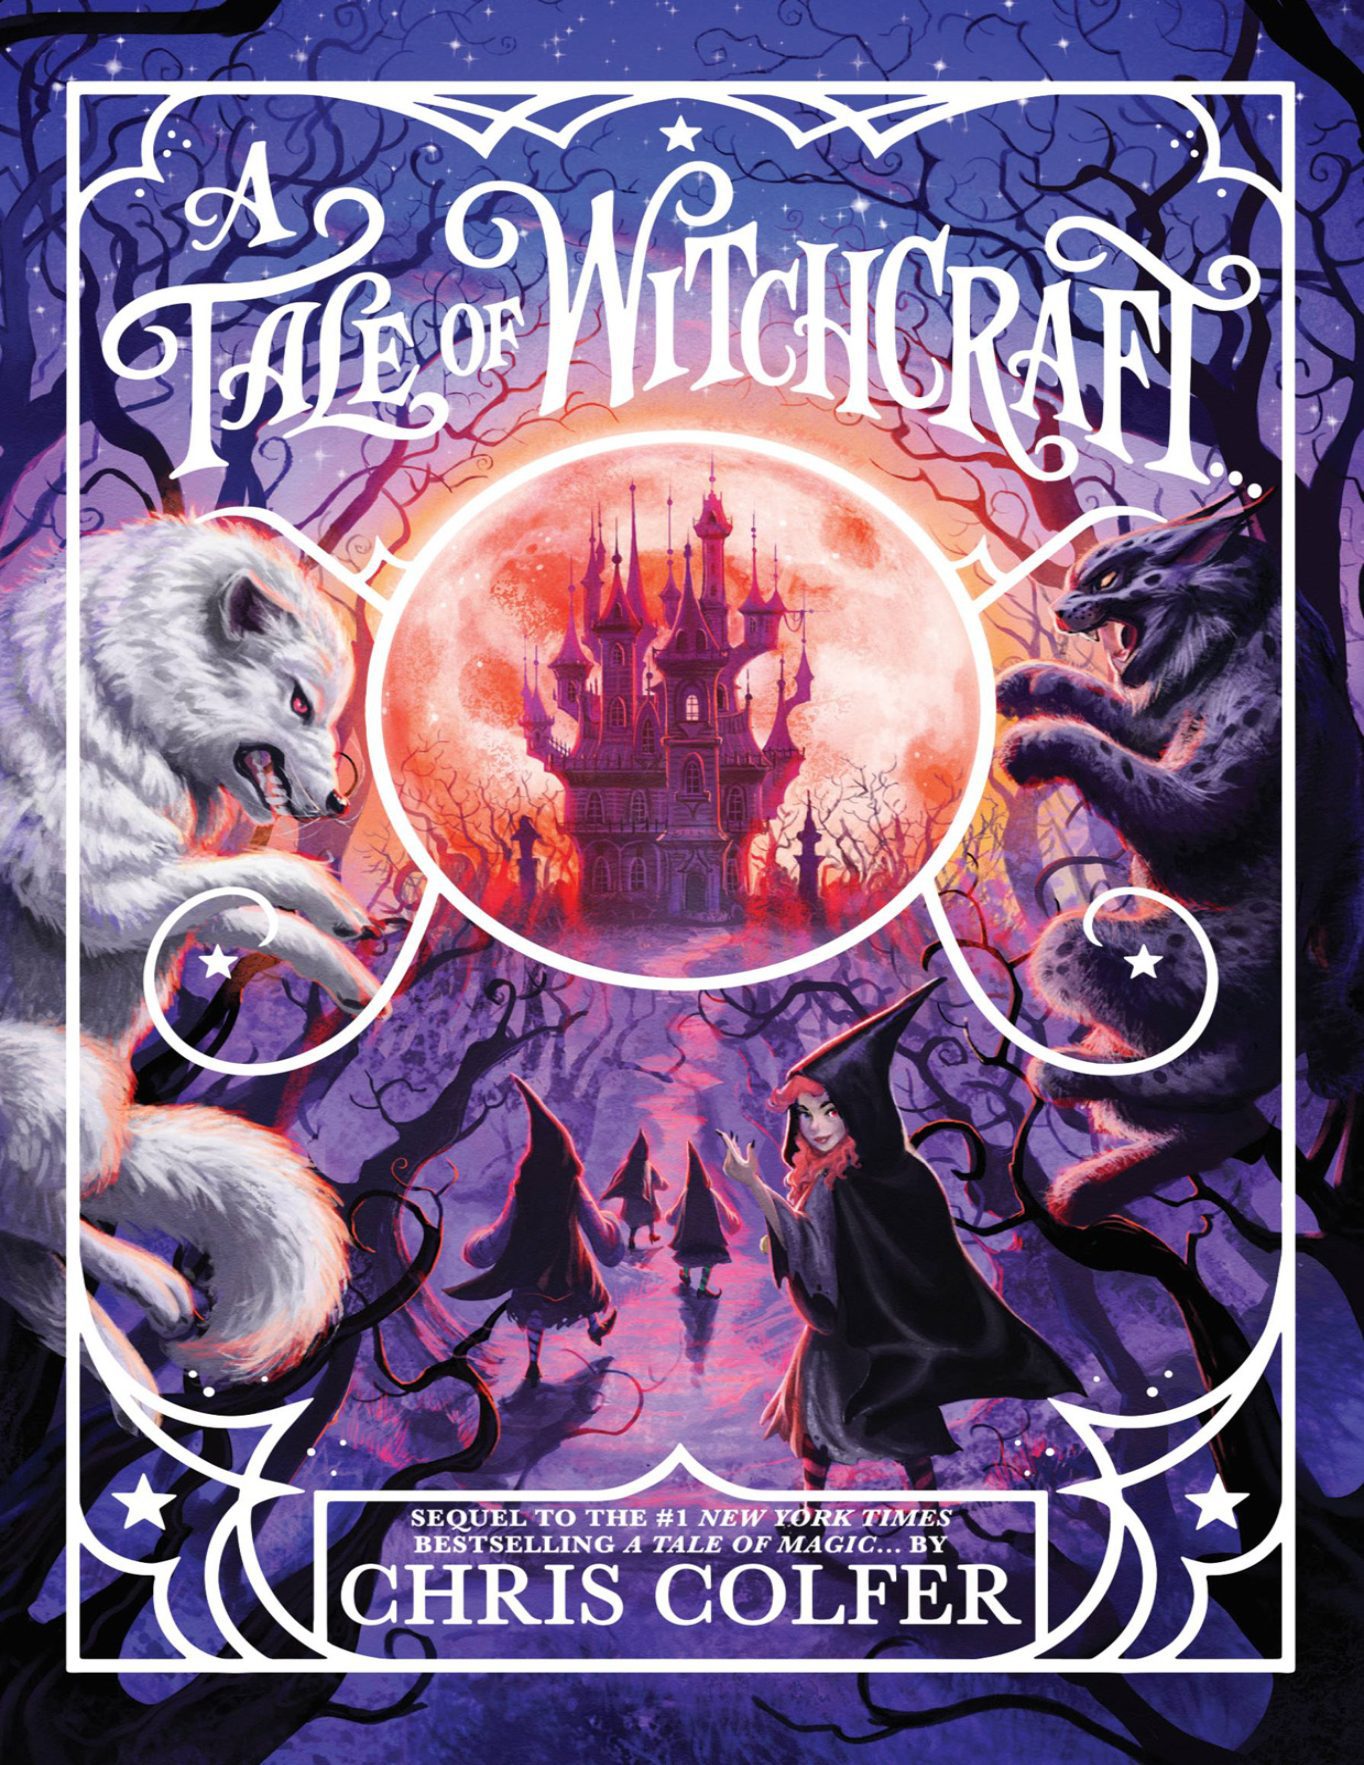 Rich Results on Google's SERP when searching for 'A Tale of Witchcraft Stories'